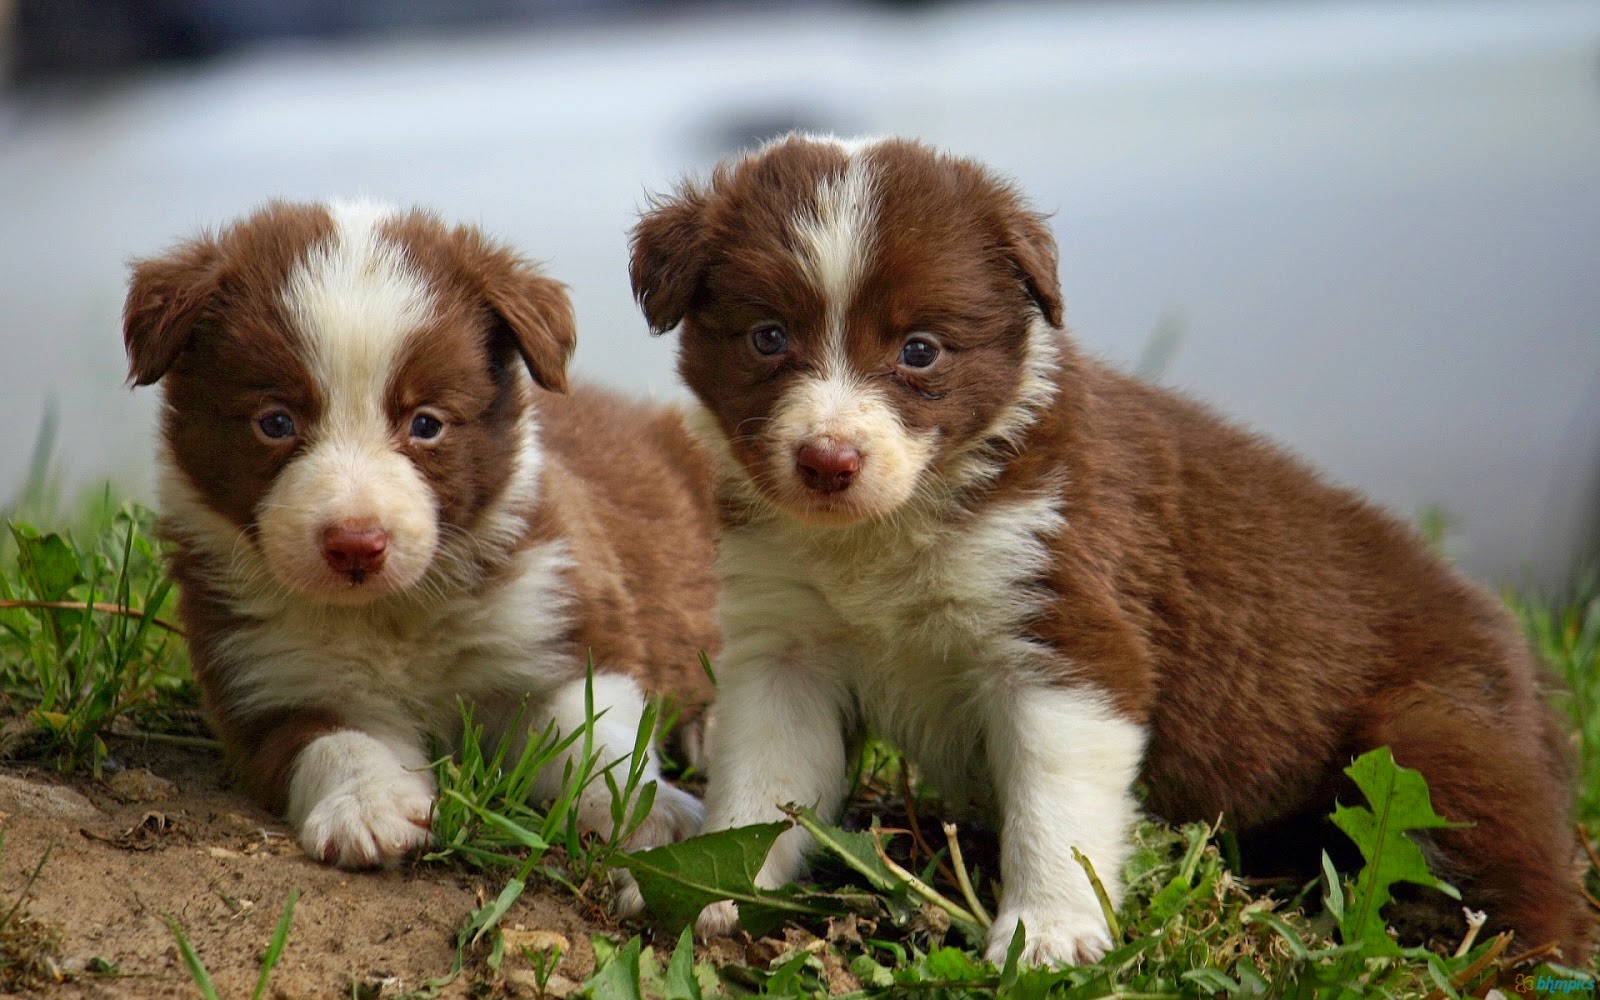 Rules of the Jungle Border Collie Puppies